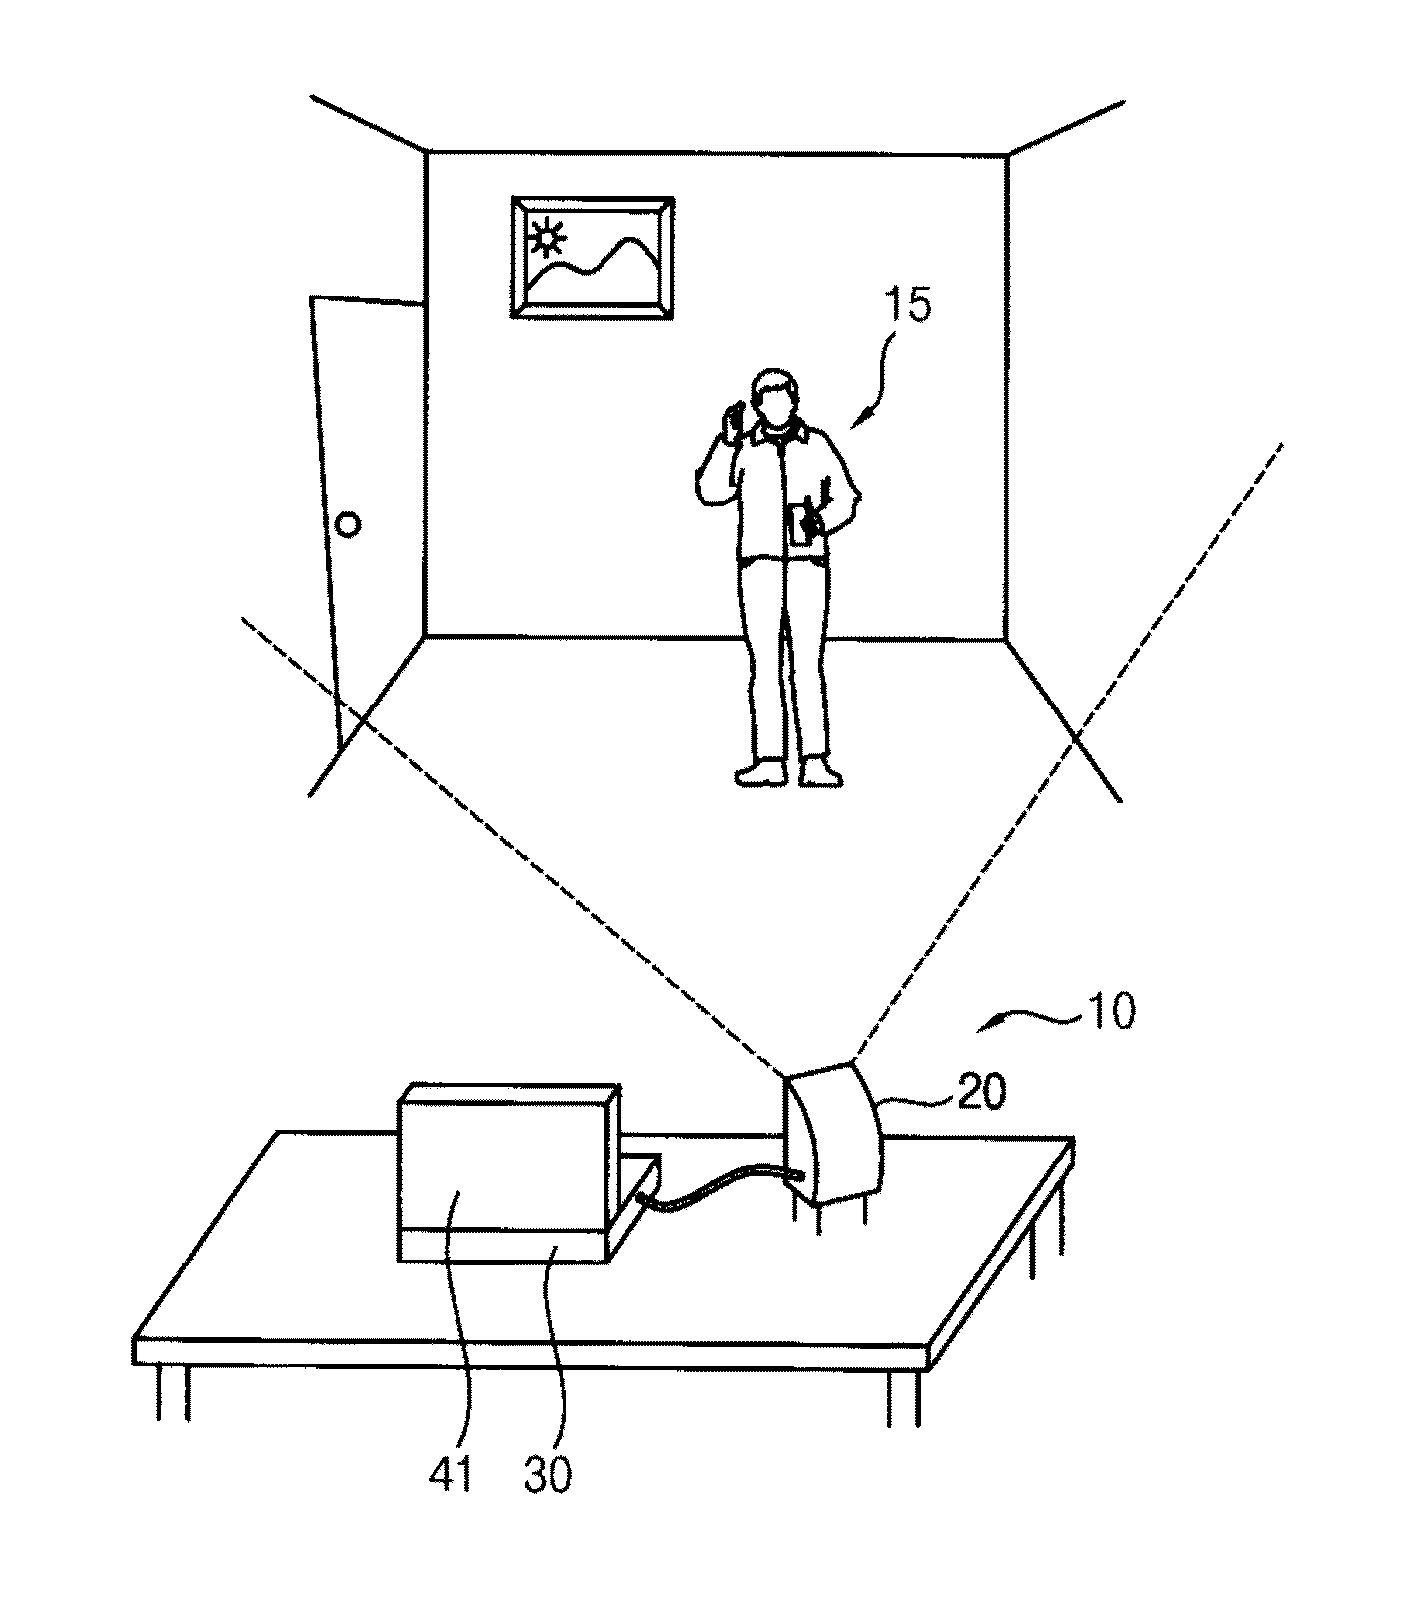 Methods of and apparatuses for recognizing motion of objects, and associated systems